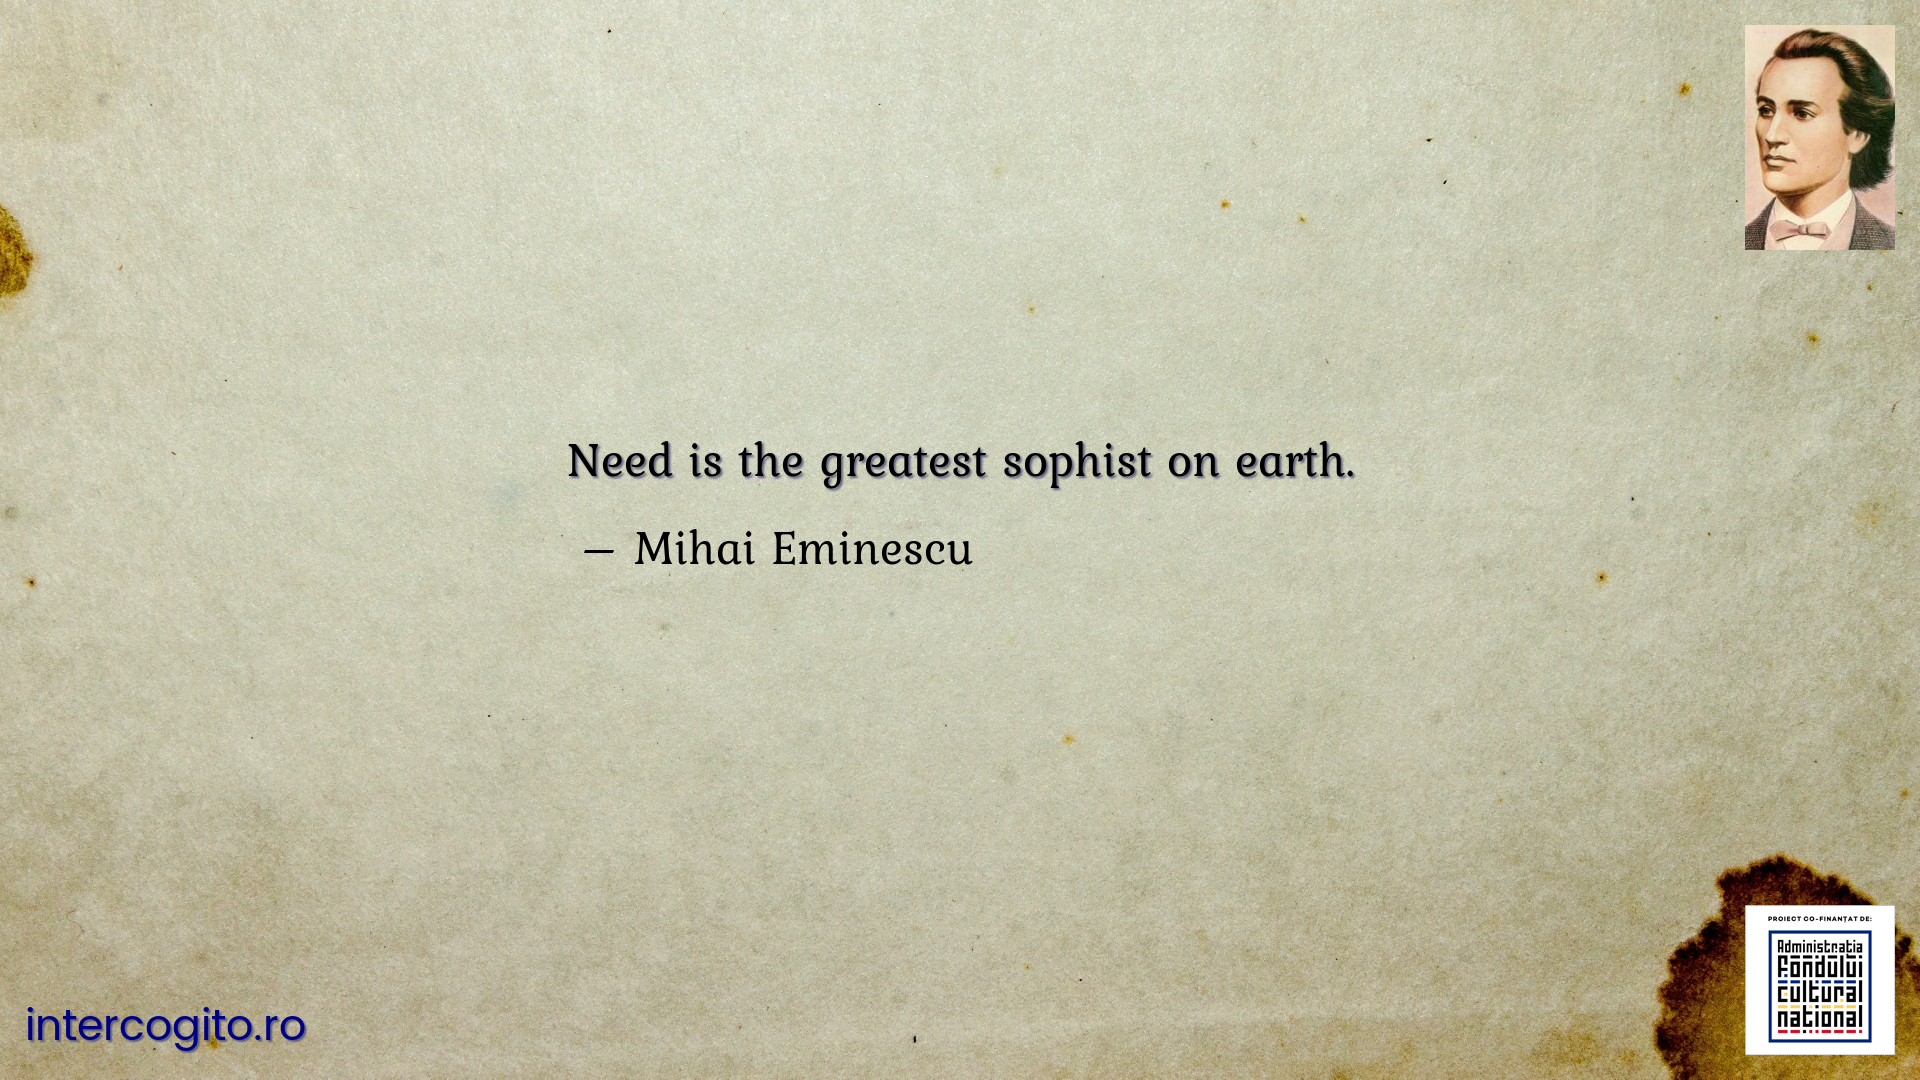 Need is the greatest sophist on earth.